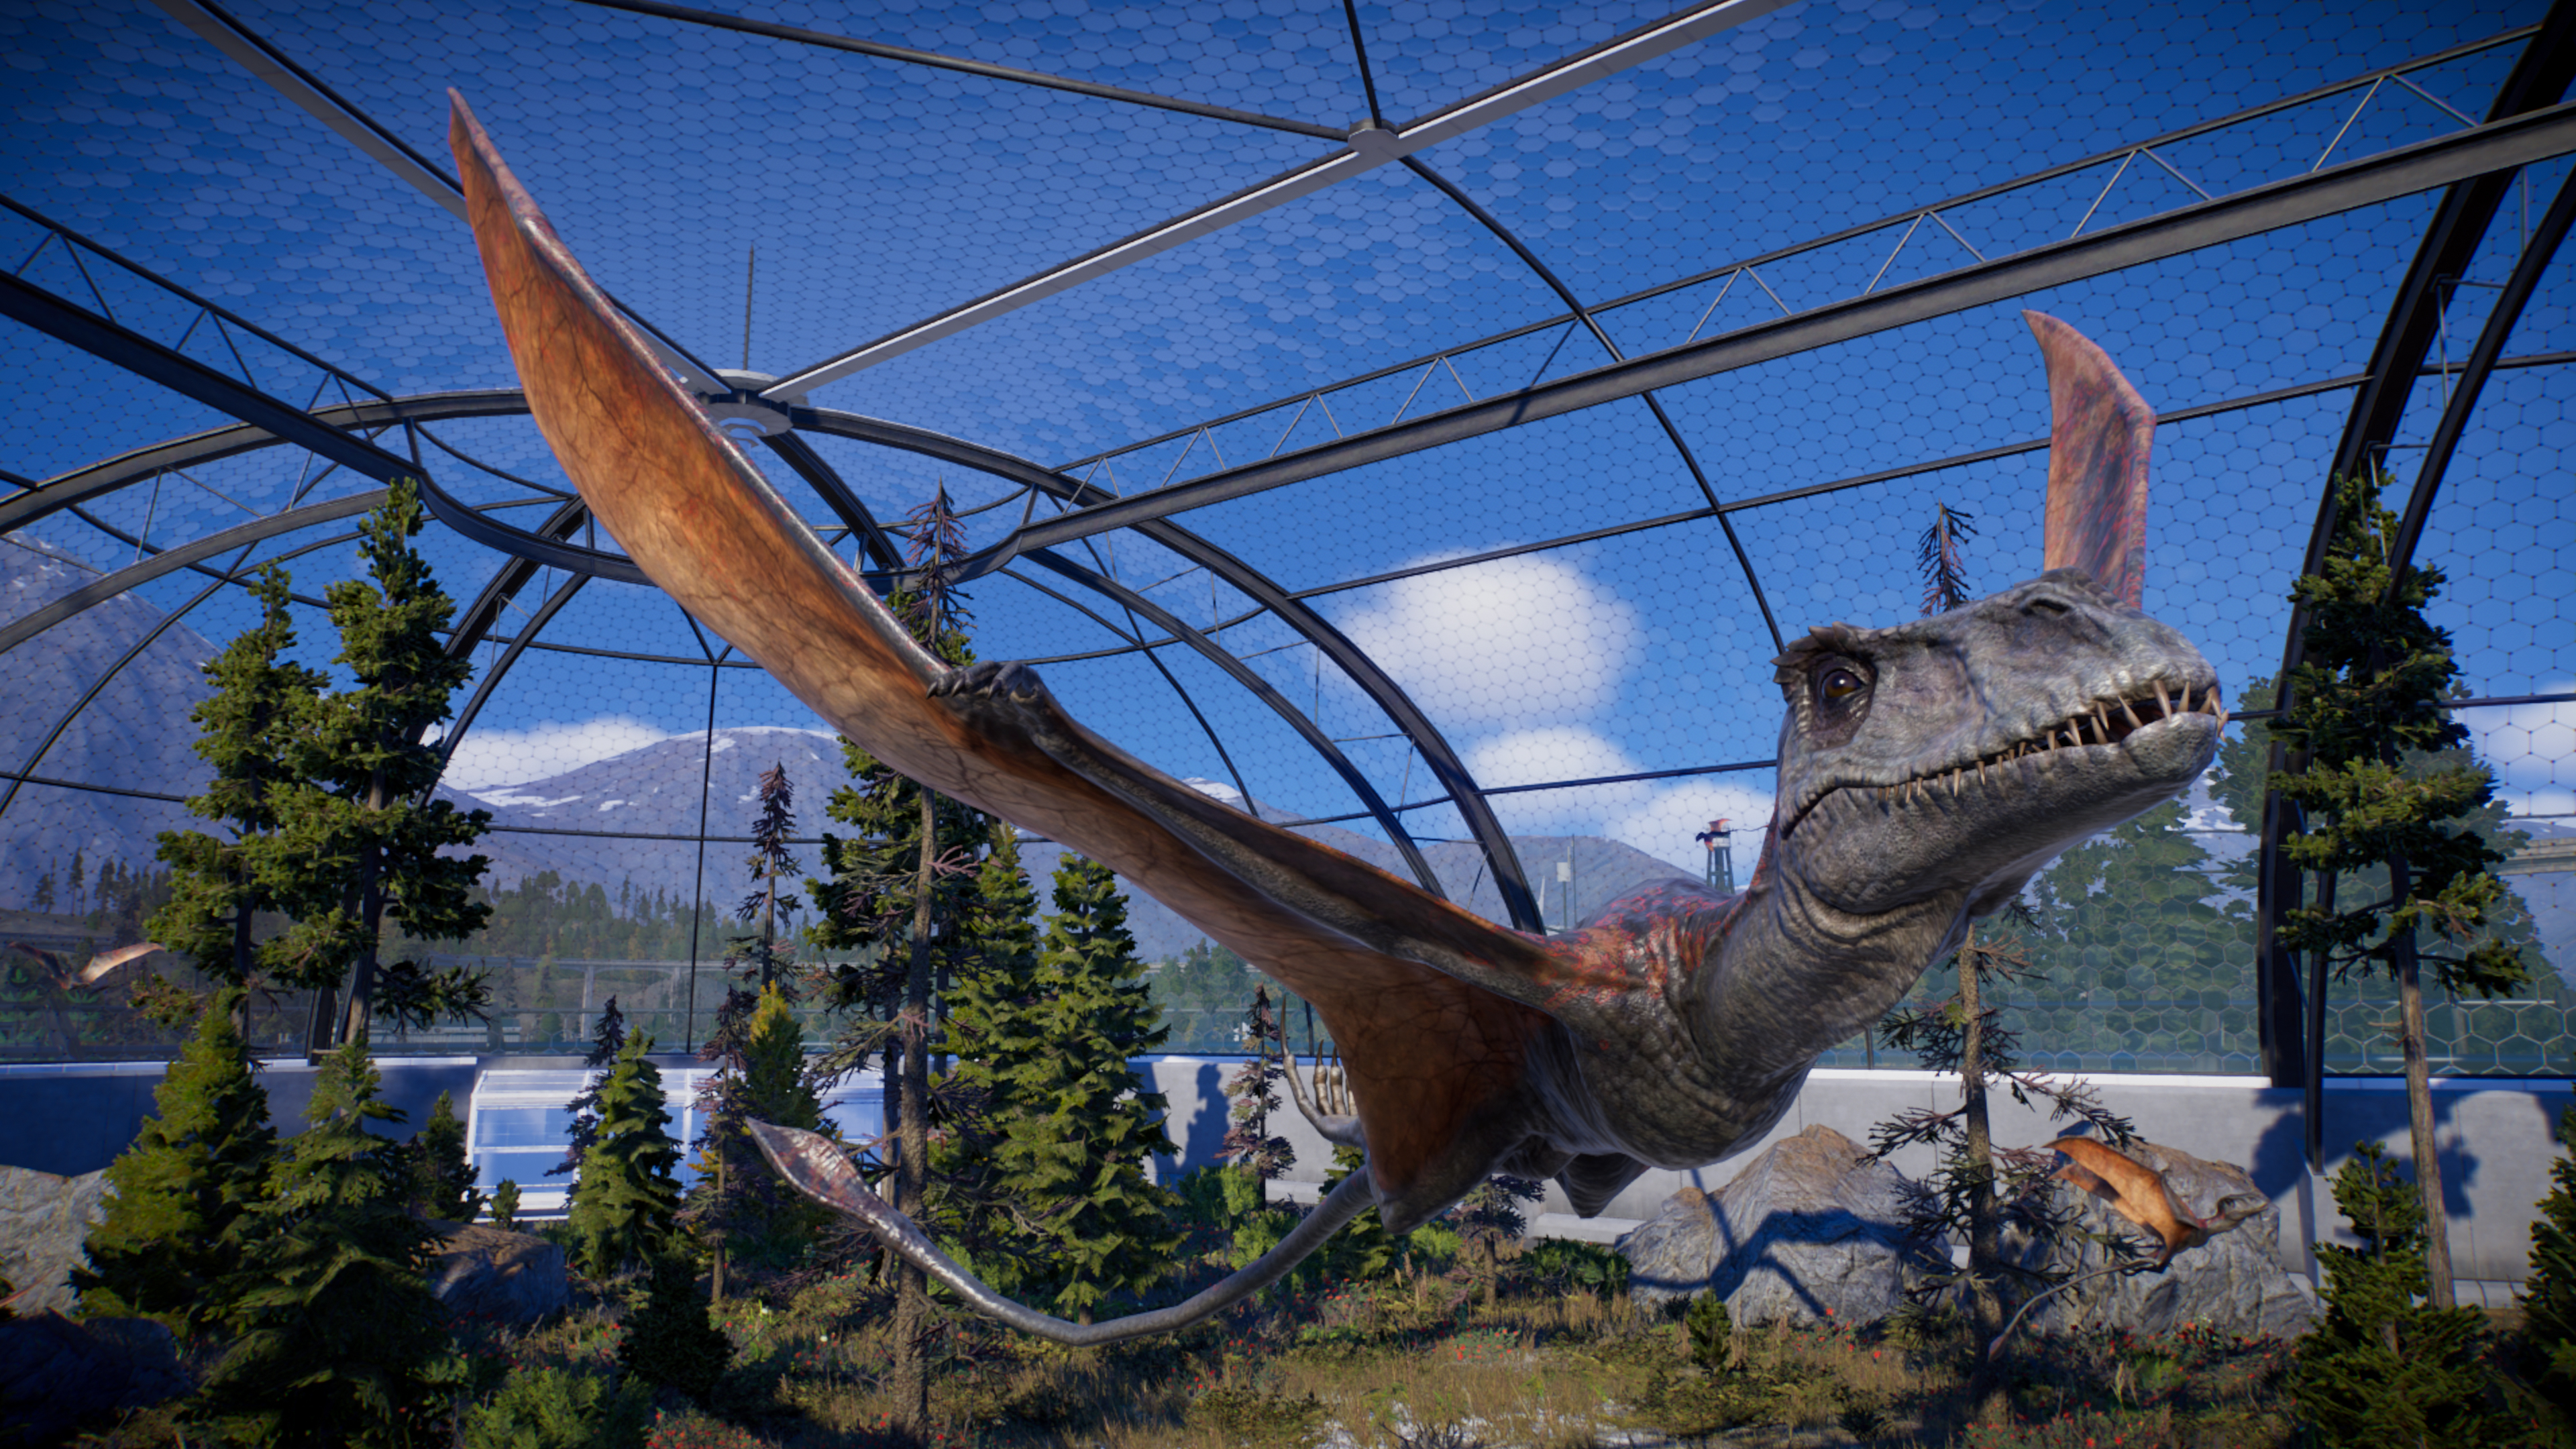 A winged dinosaur taking flight in an domed enclosure